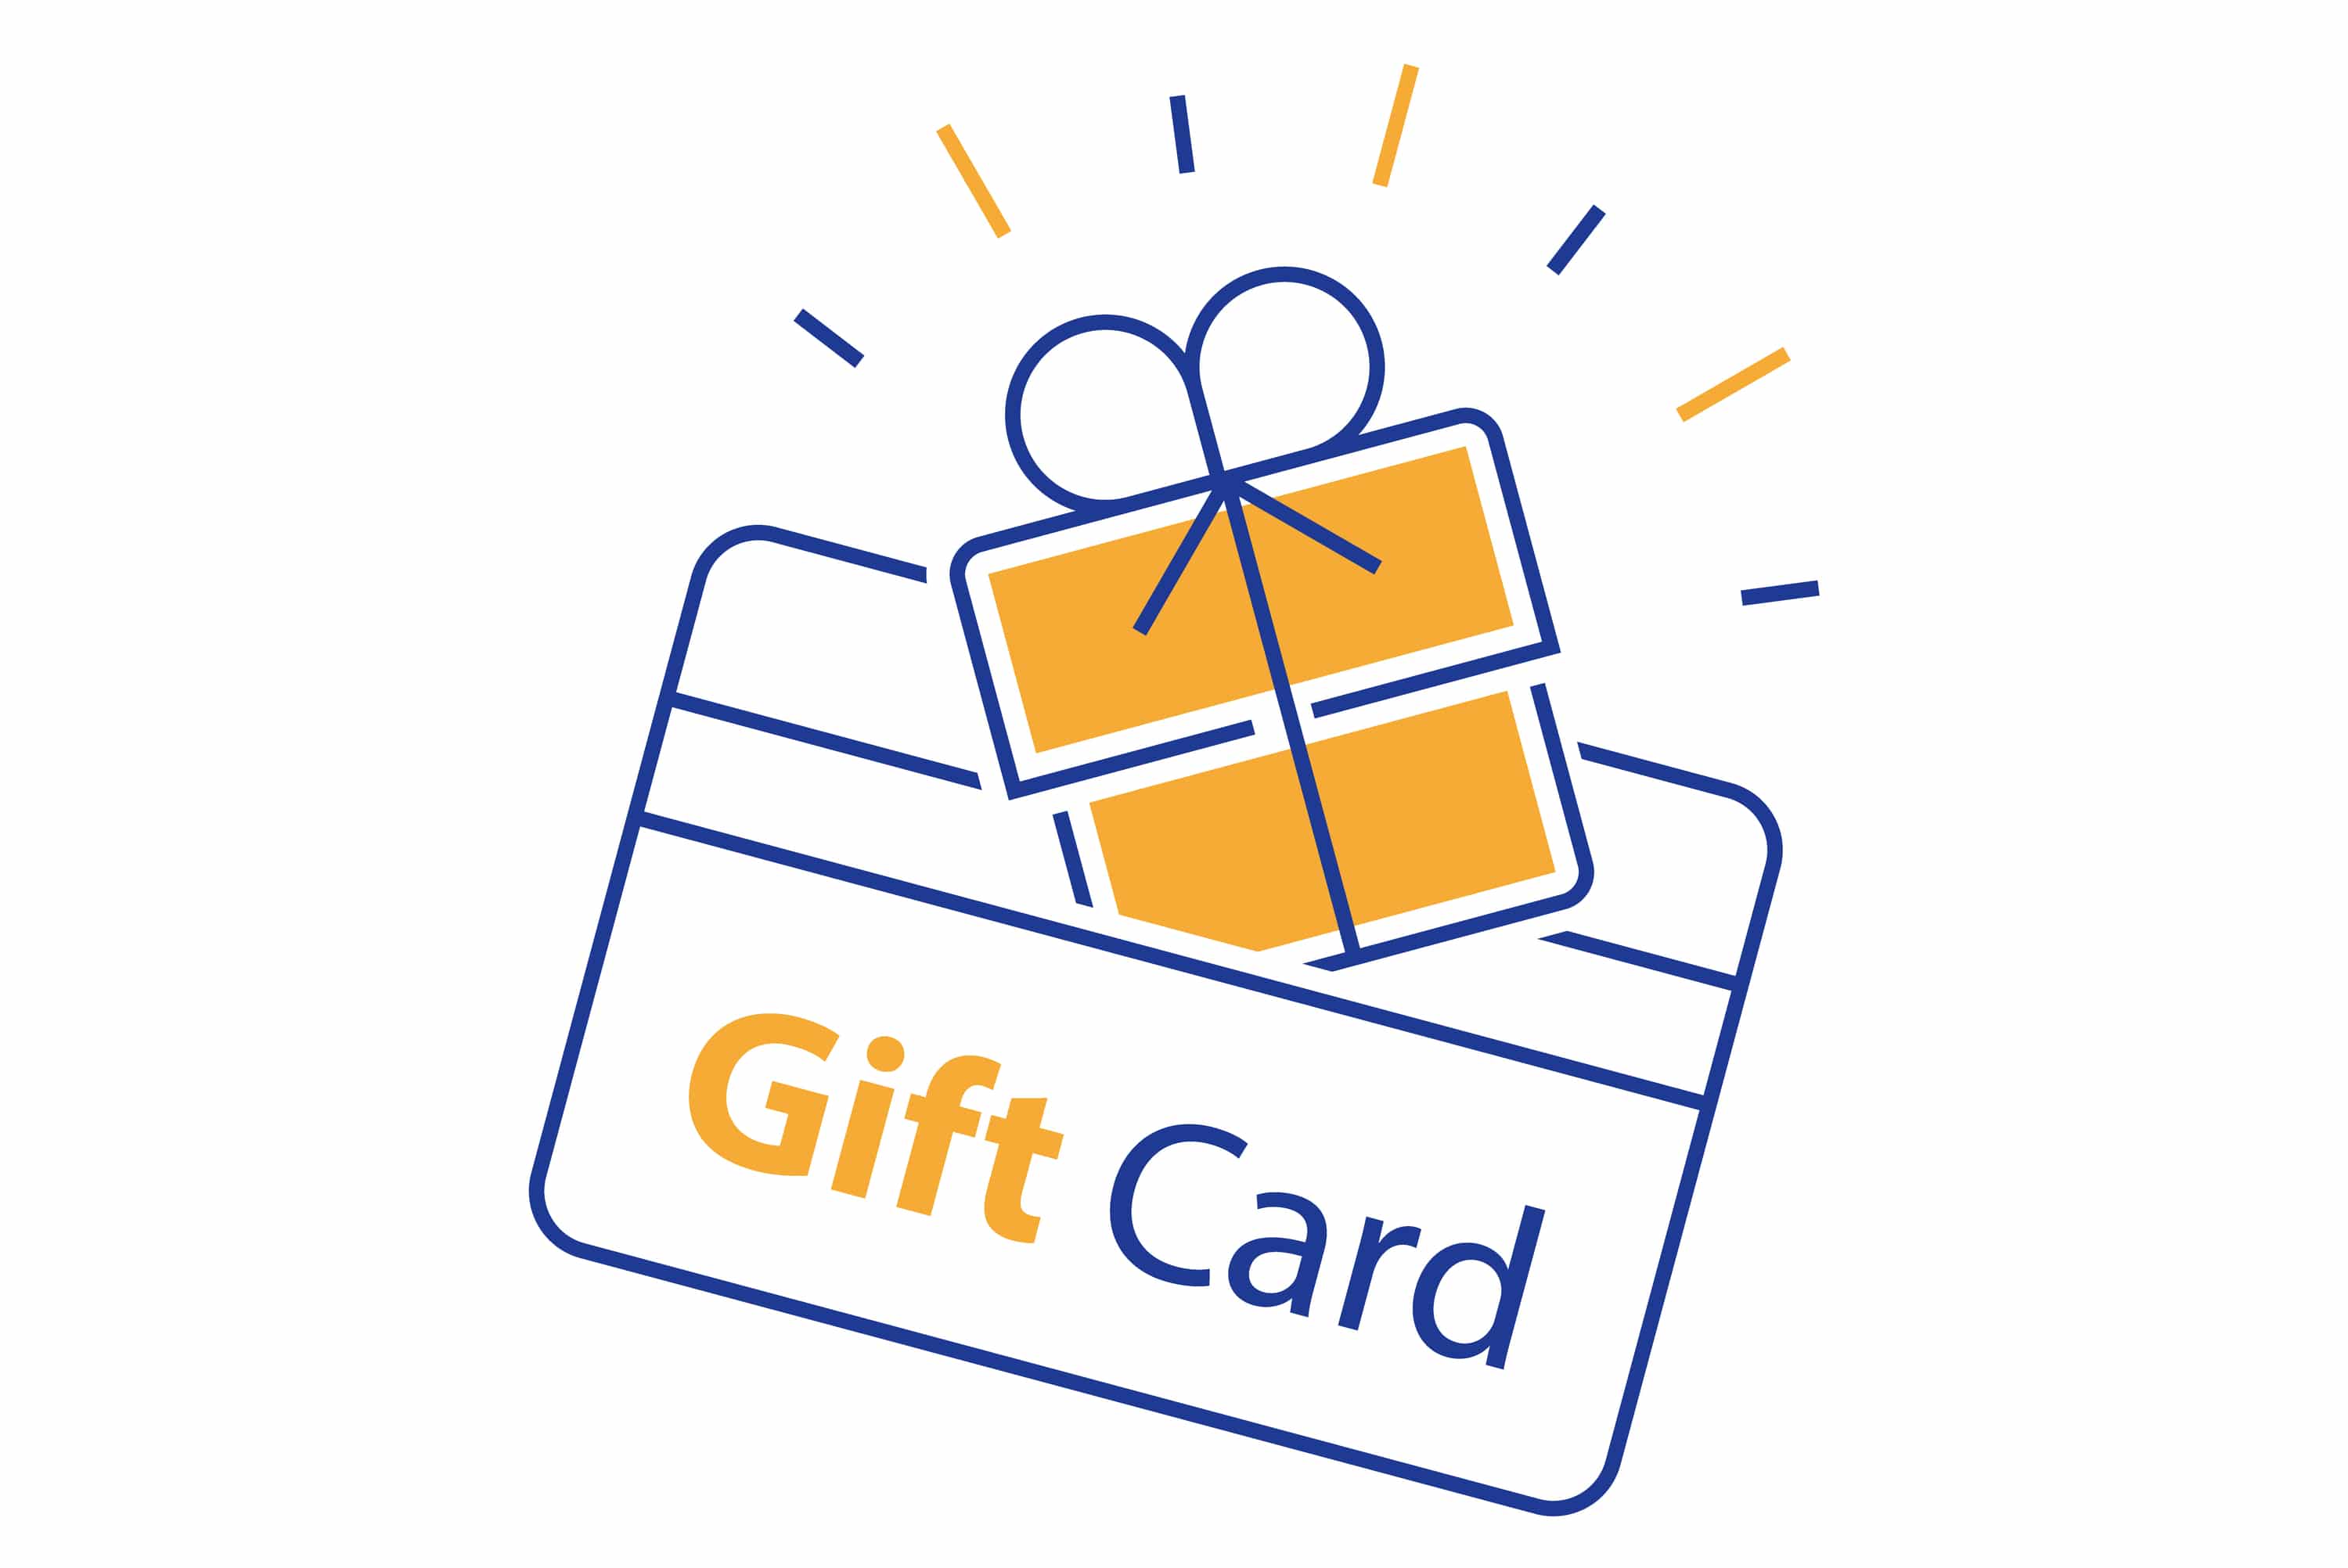 Gift Card Giveaway: Get 10 Free Gift Cards every 2nd week!